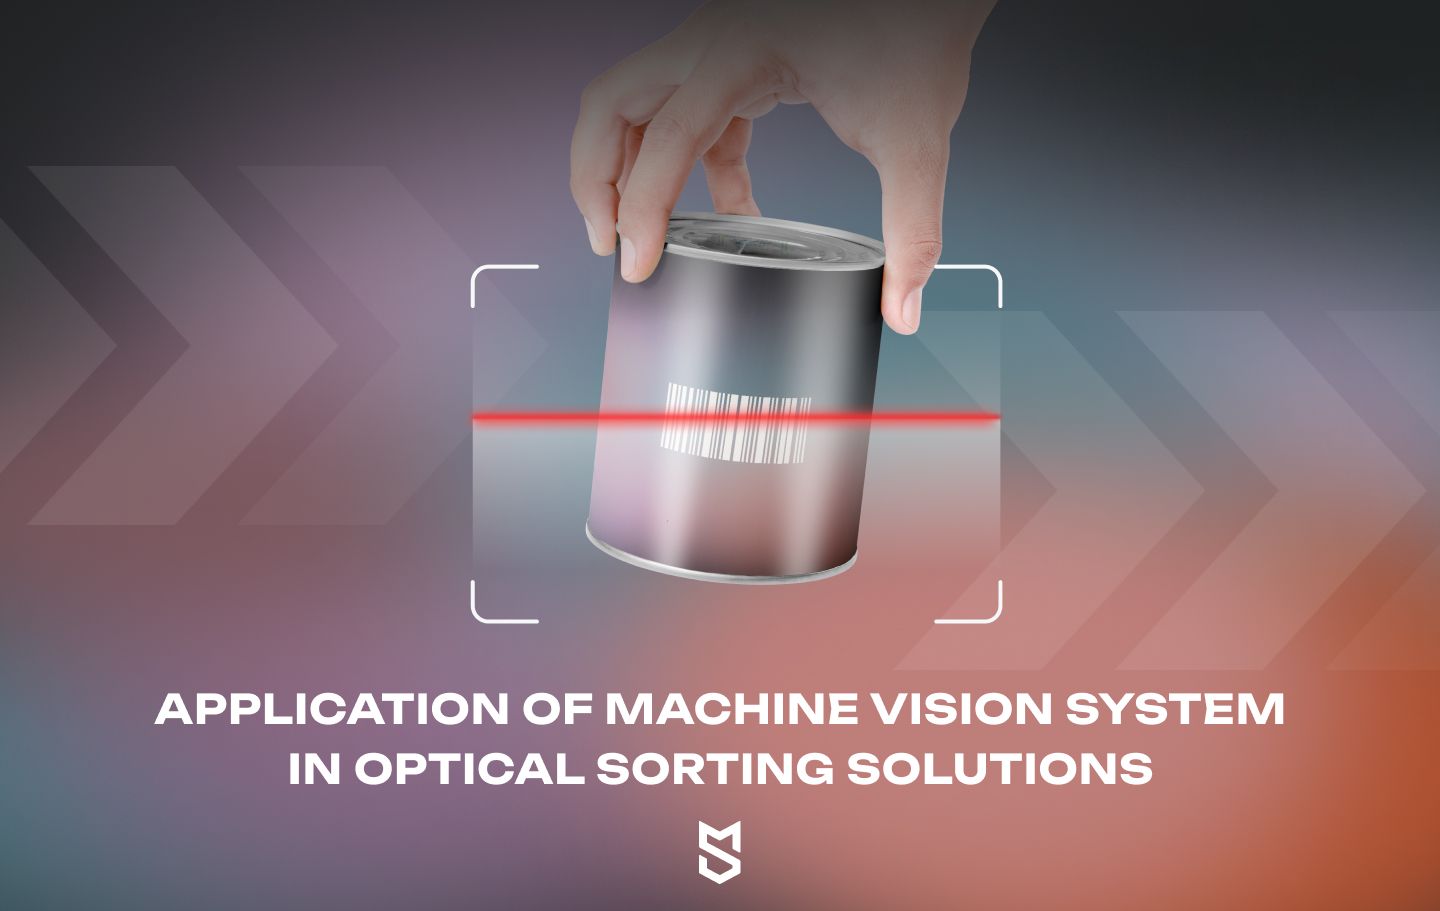 Food sorting: application of machine vision system in optical sorting solutions